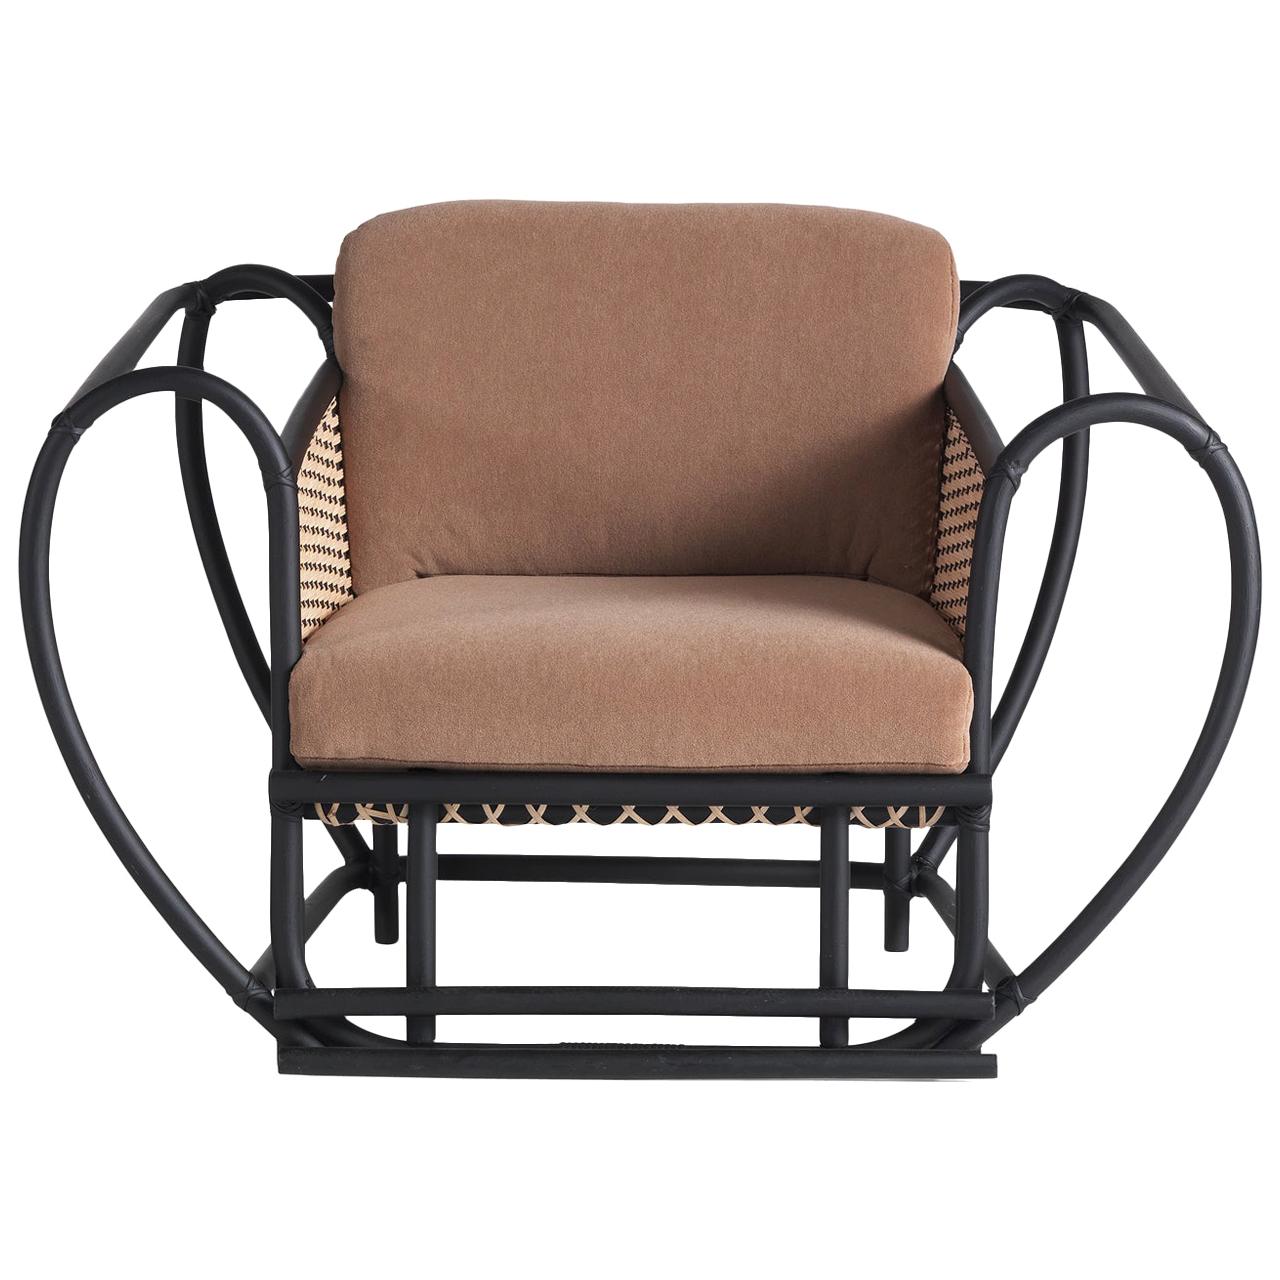 Green Channel Armchair with Black Frame For Sale